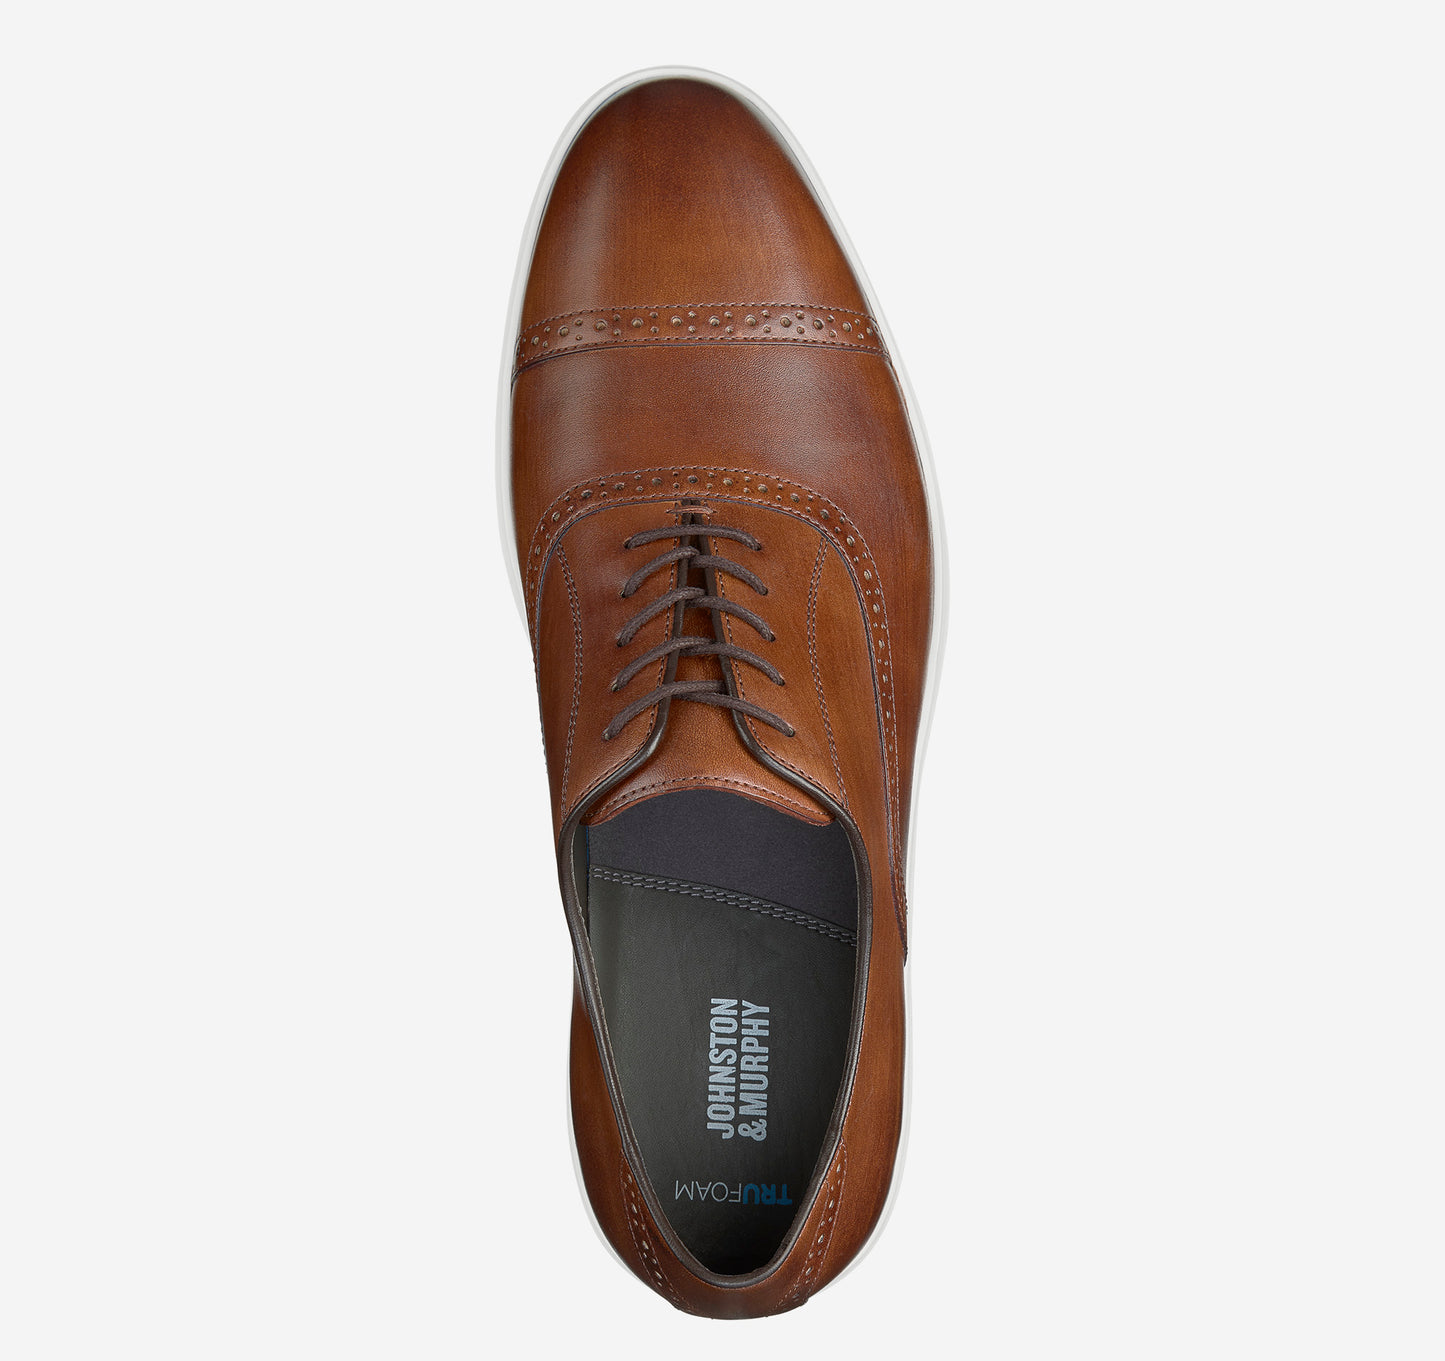 Brody Cap Toe - Brown Hand-Stained Full Grain